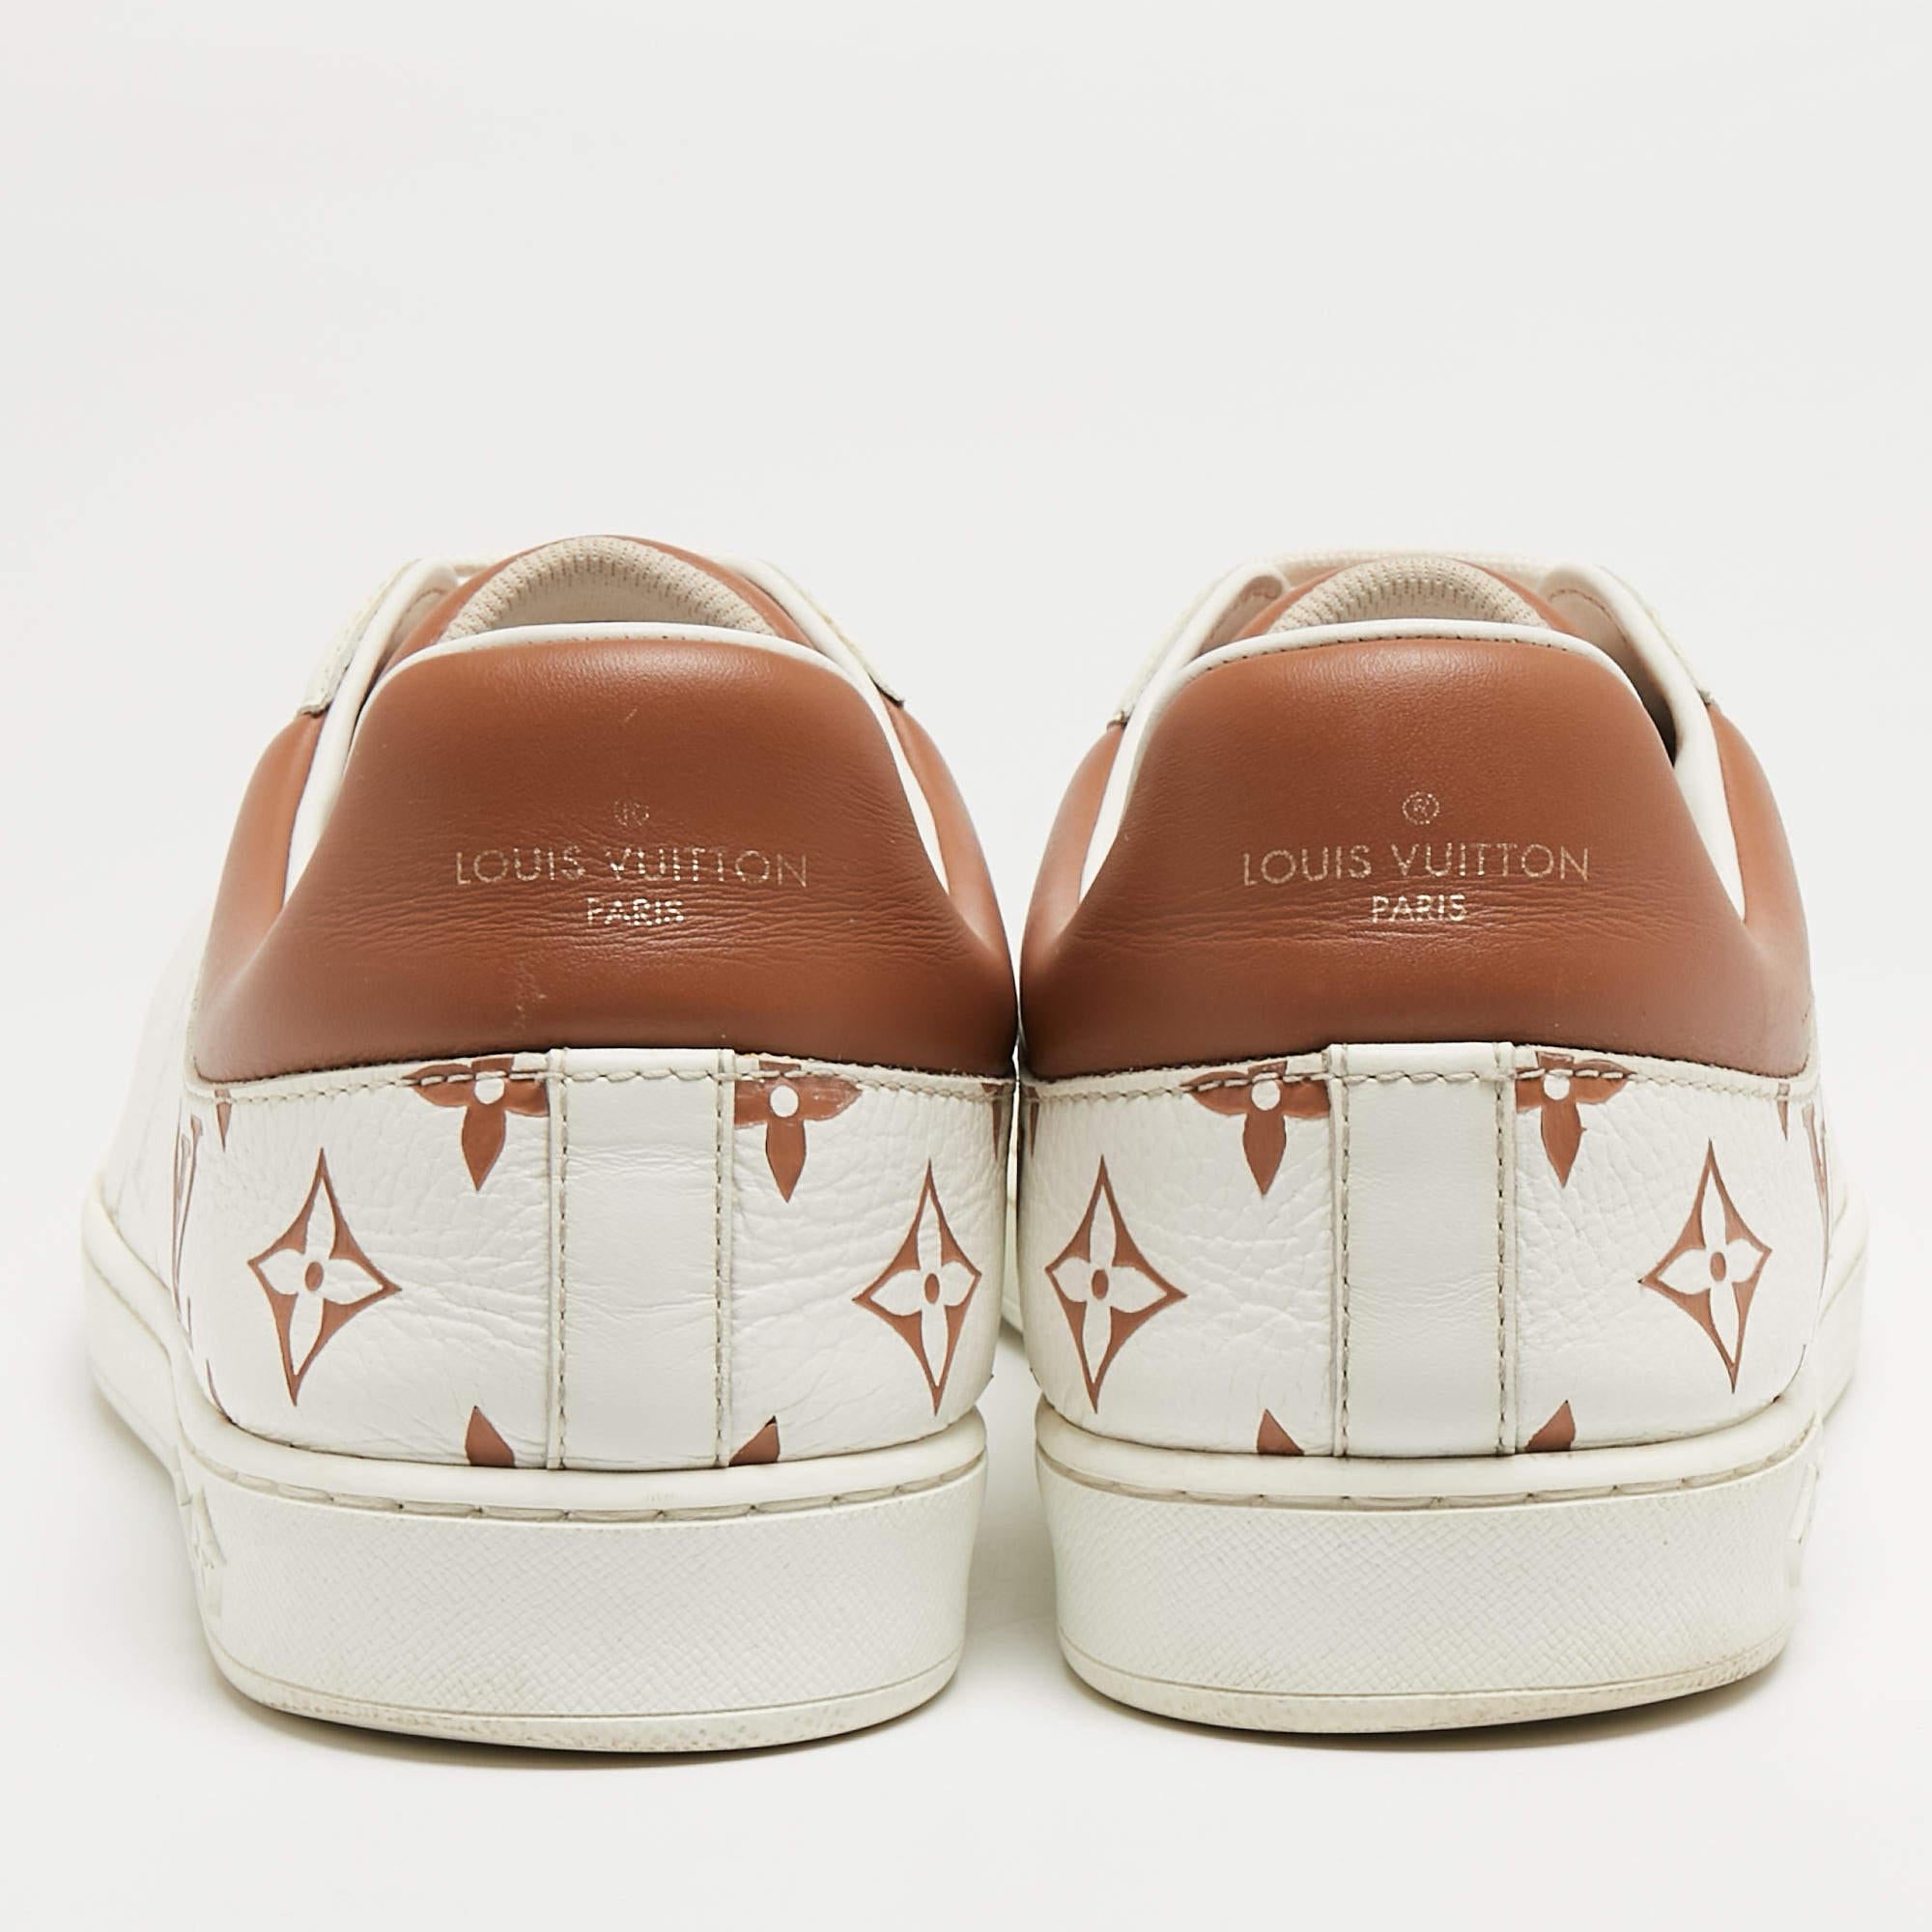 Louis Vuitton White/Brown Leather Luxembourg Sneakers Size 42 1